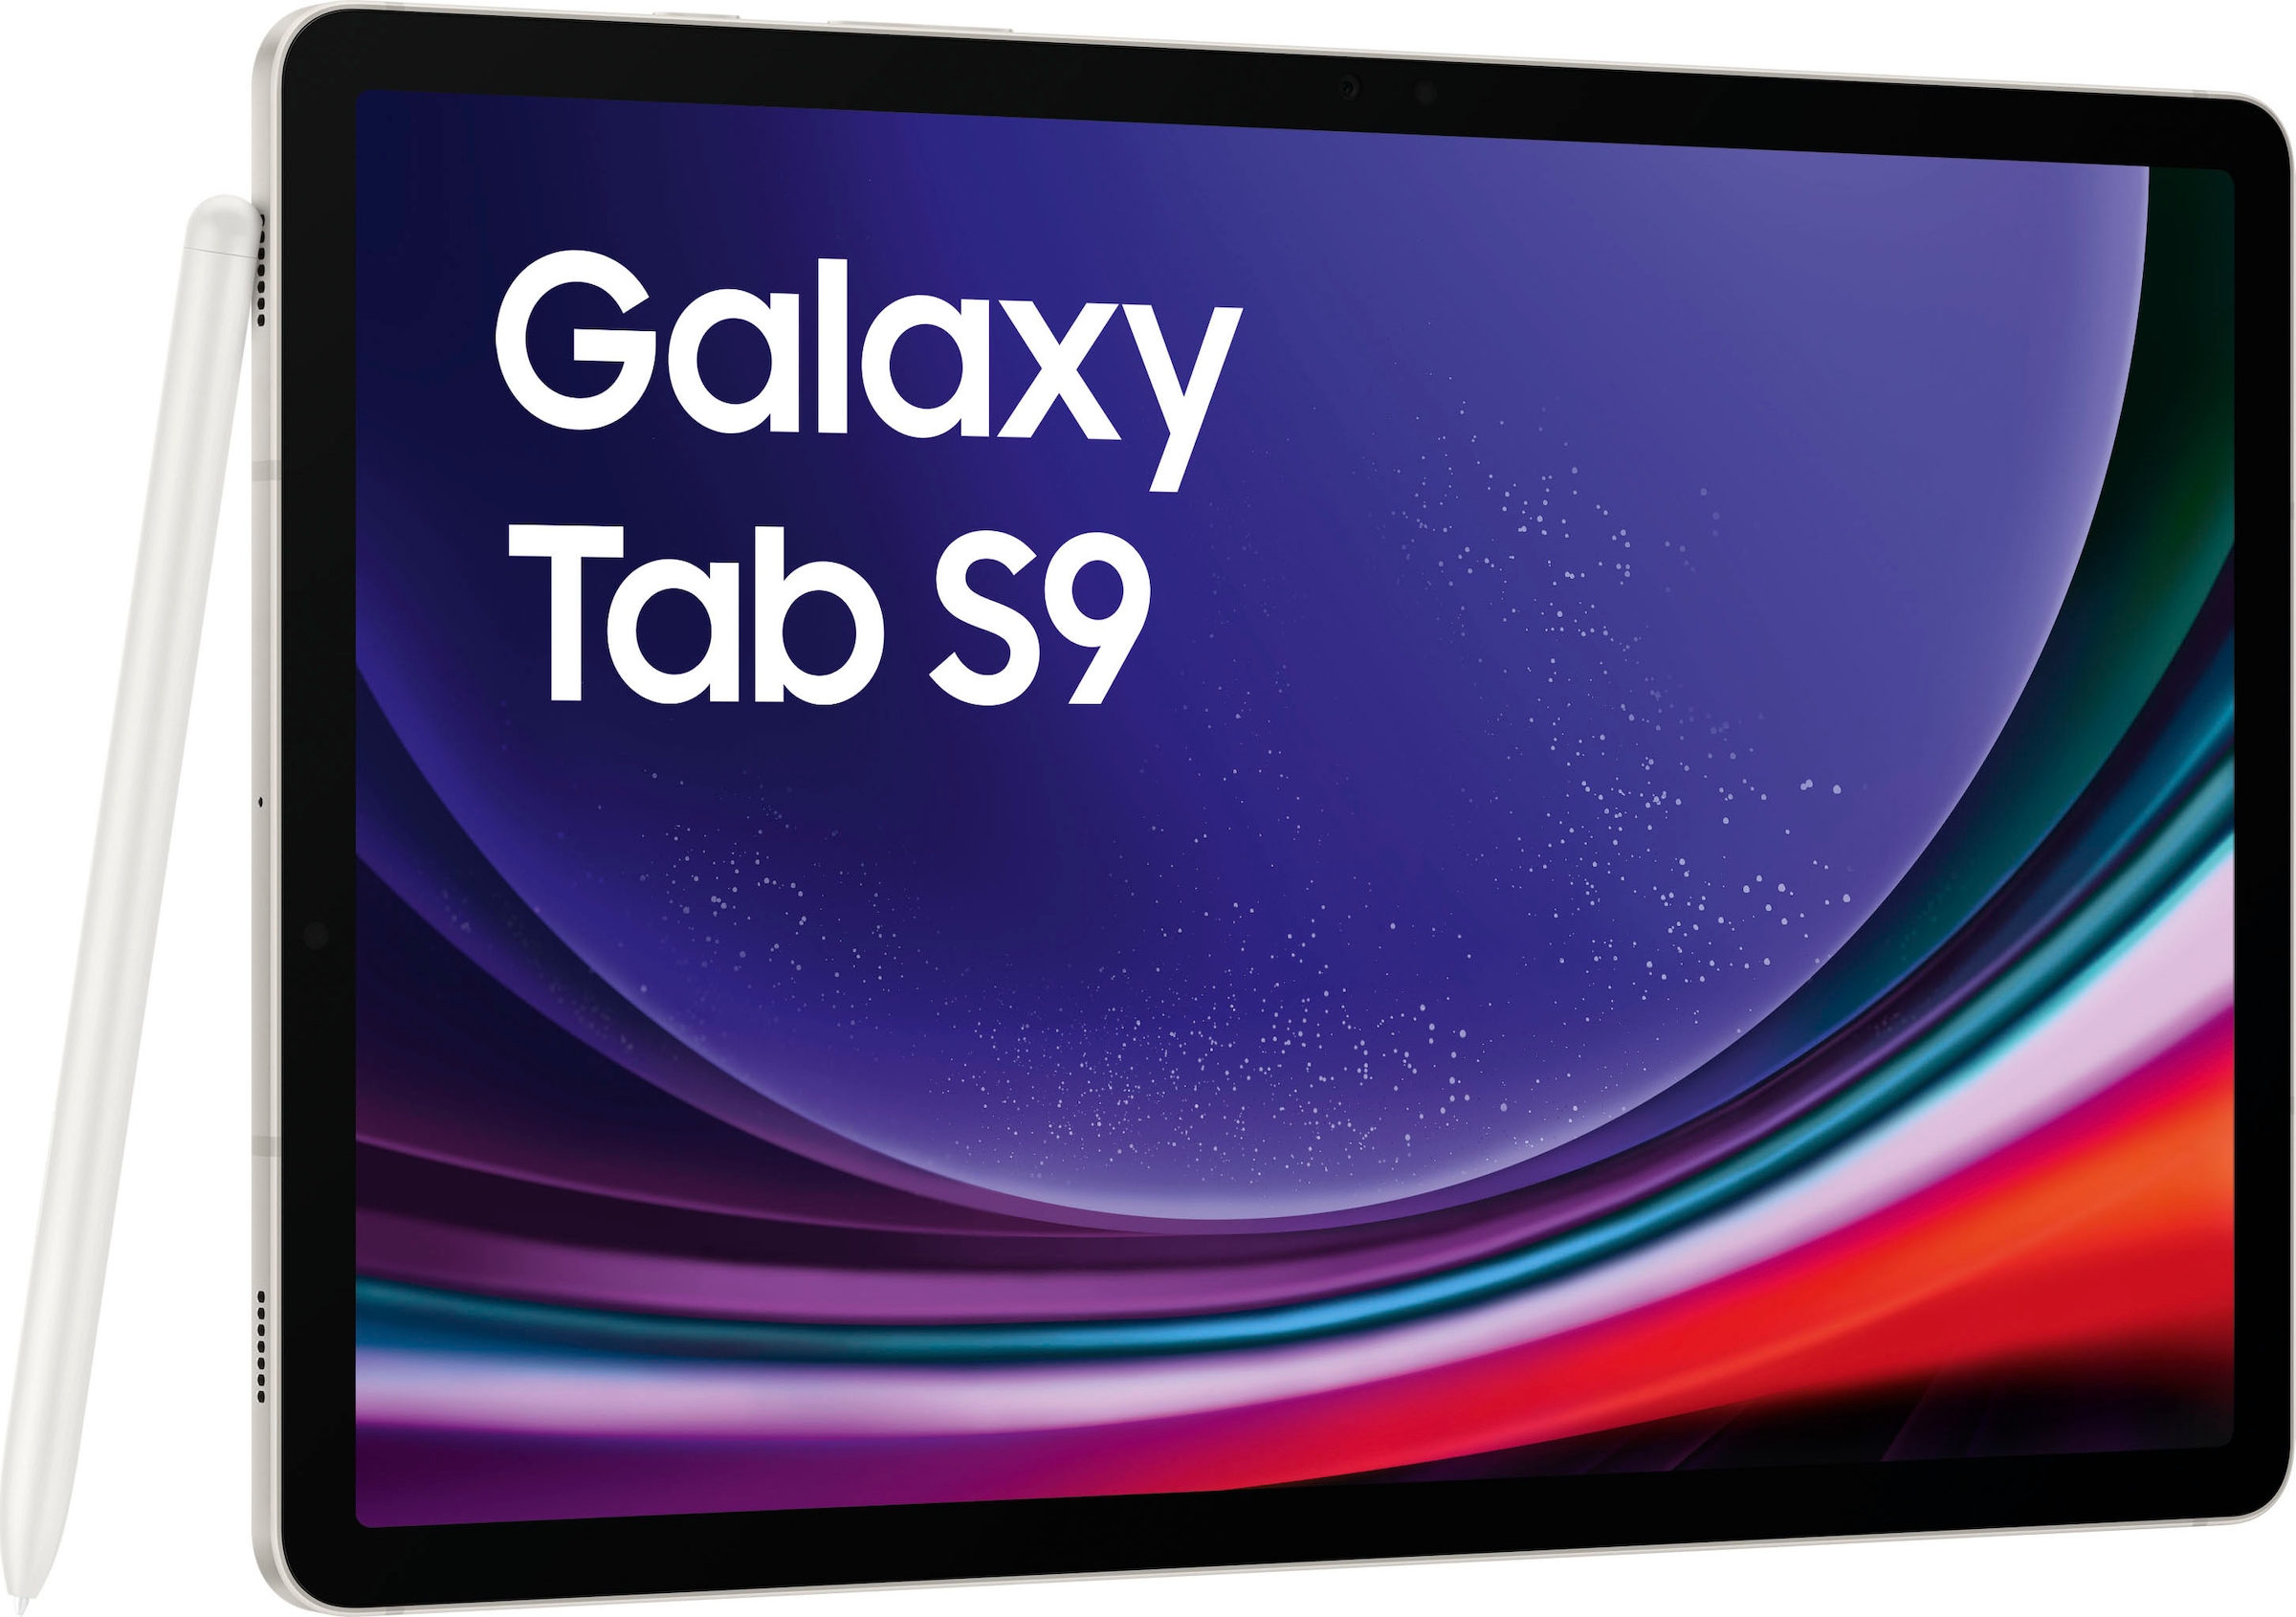 Samsung Tablet »Galaxy Tab S9 WiFi«, (Android)